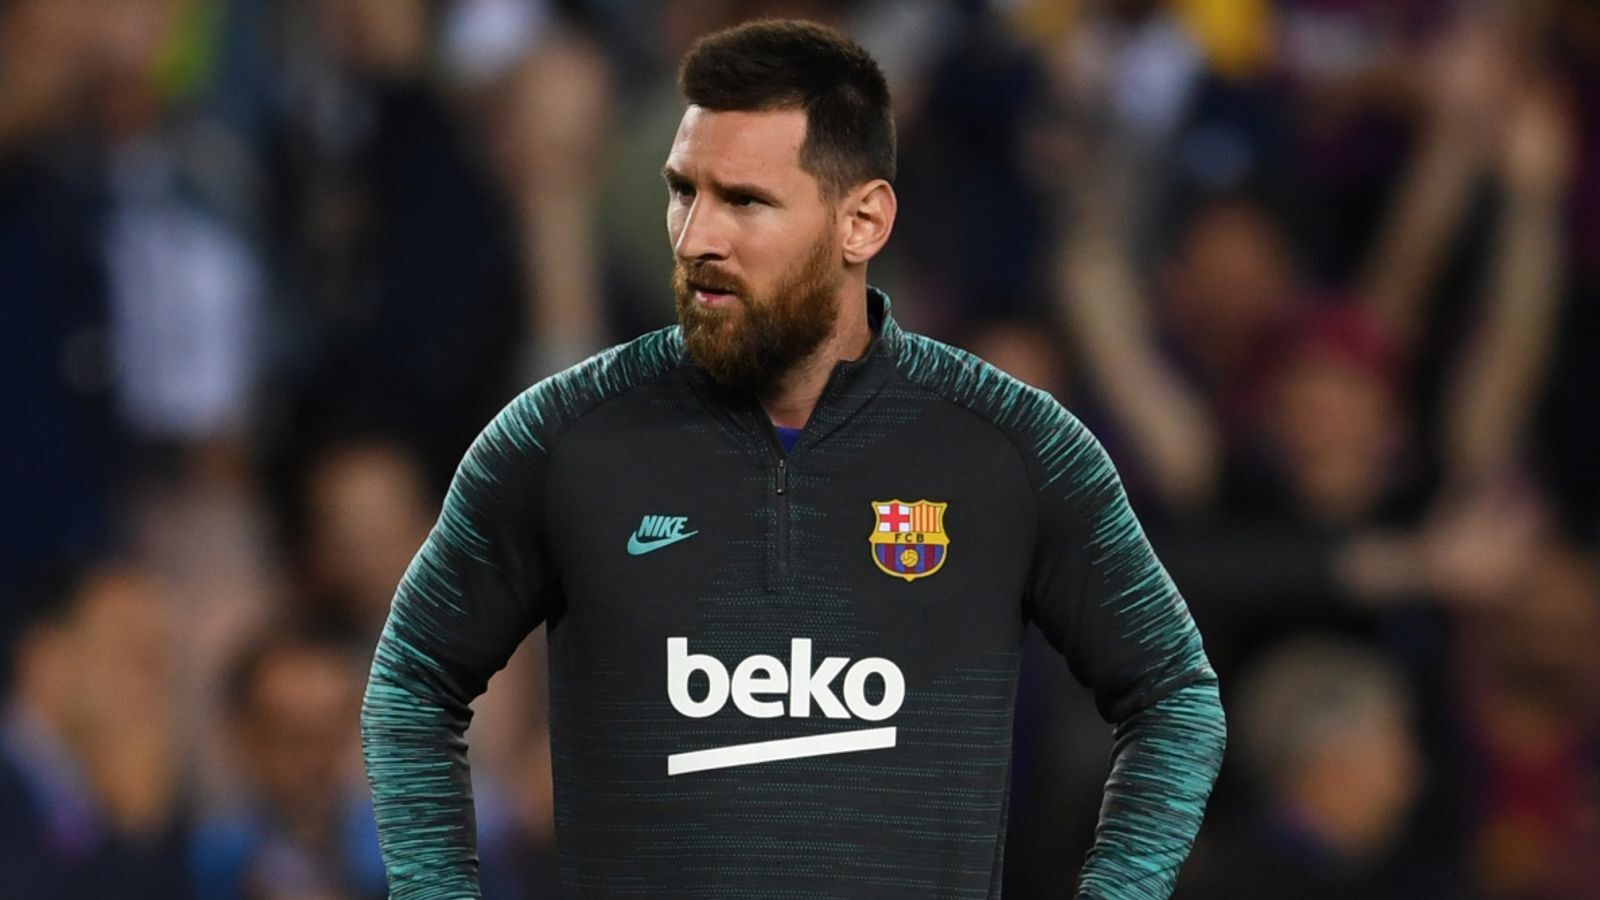 Barcelona to Extend Contract for Star Player Lionel Messi